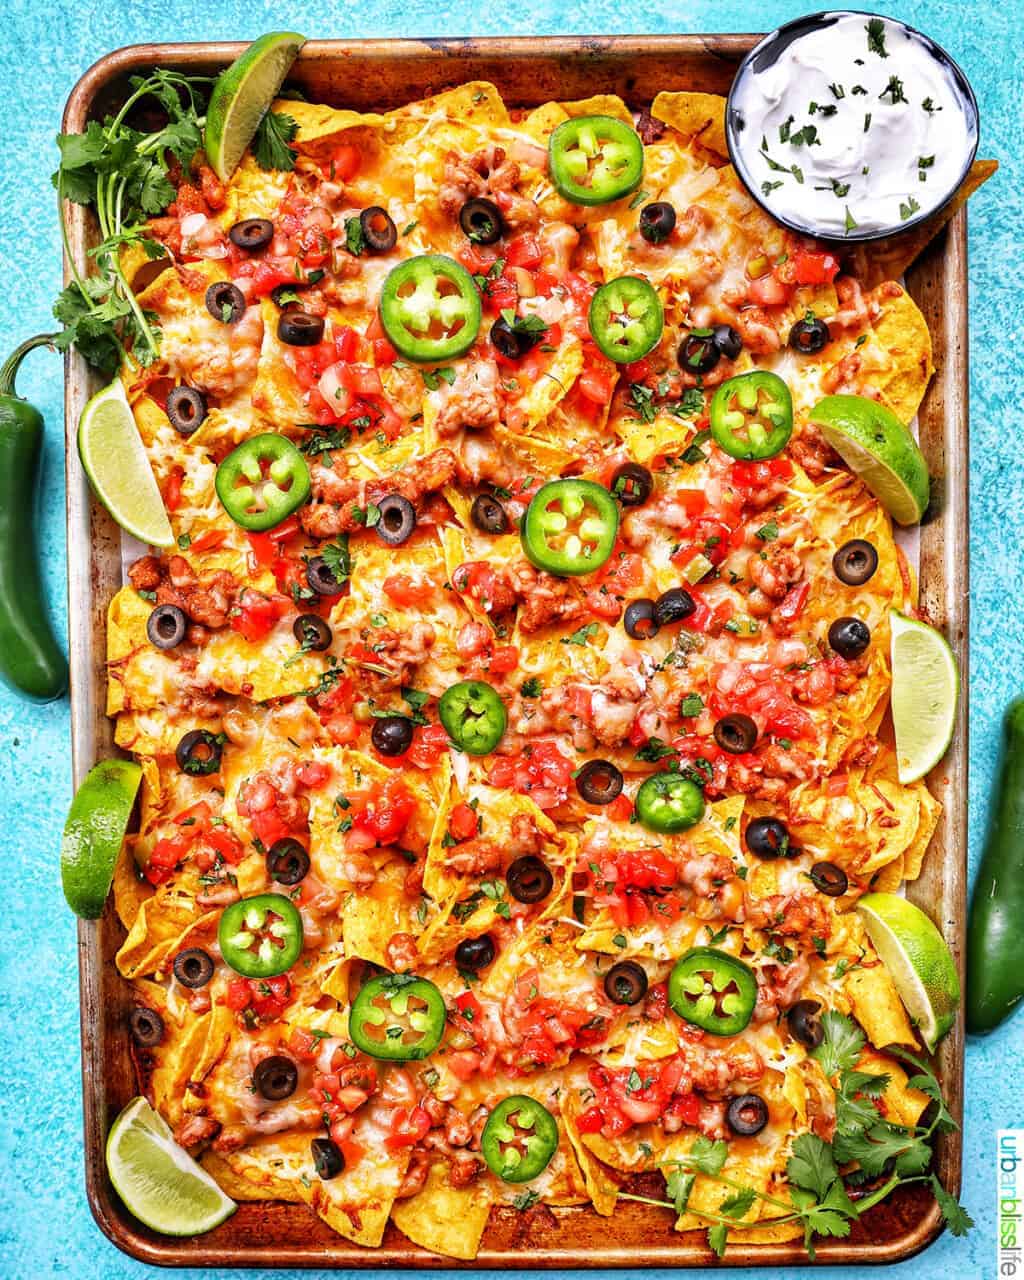 Sheet pan filled with nachos with melted cheese.